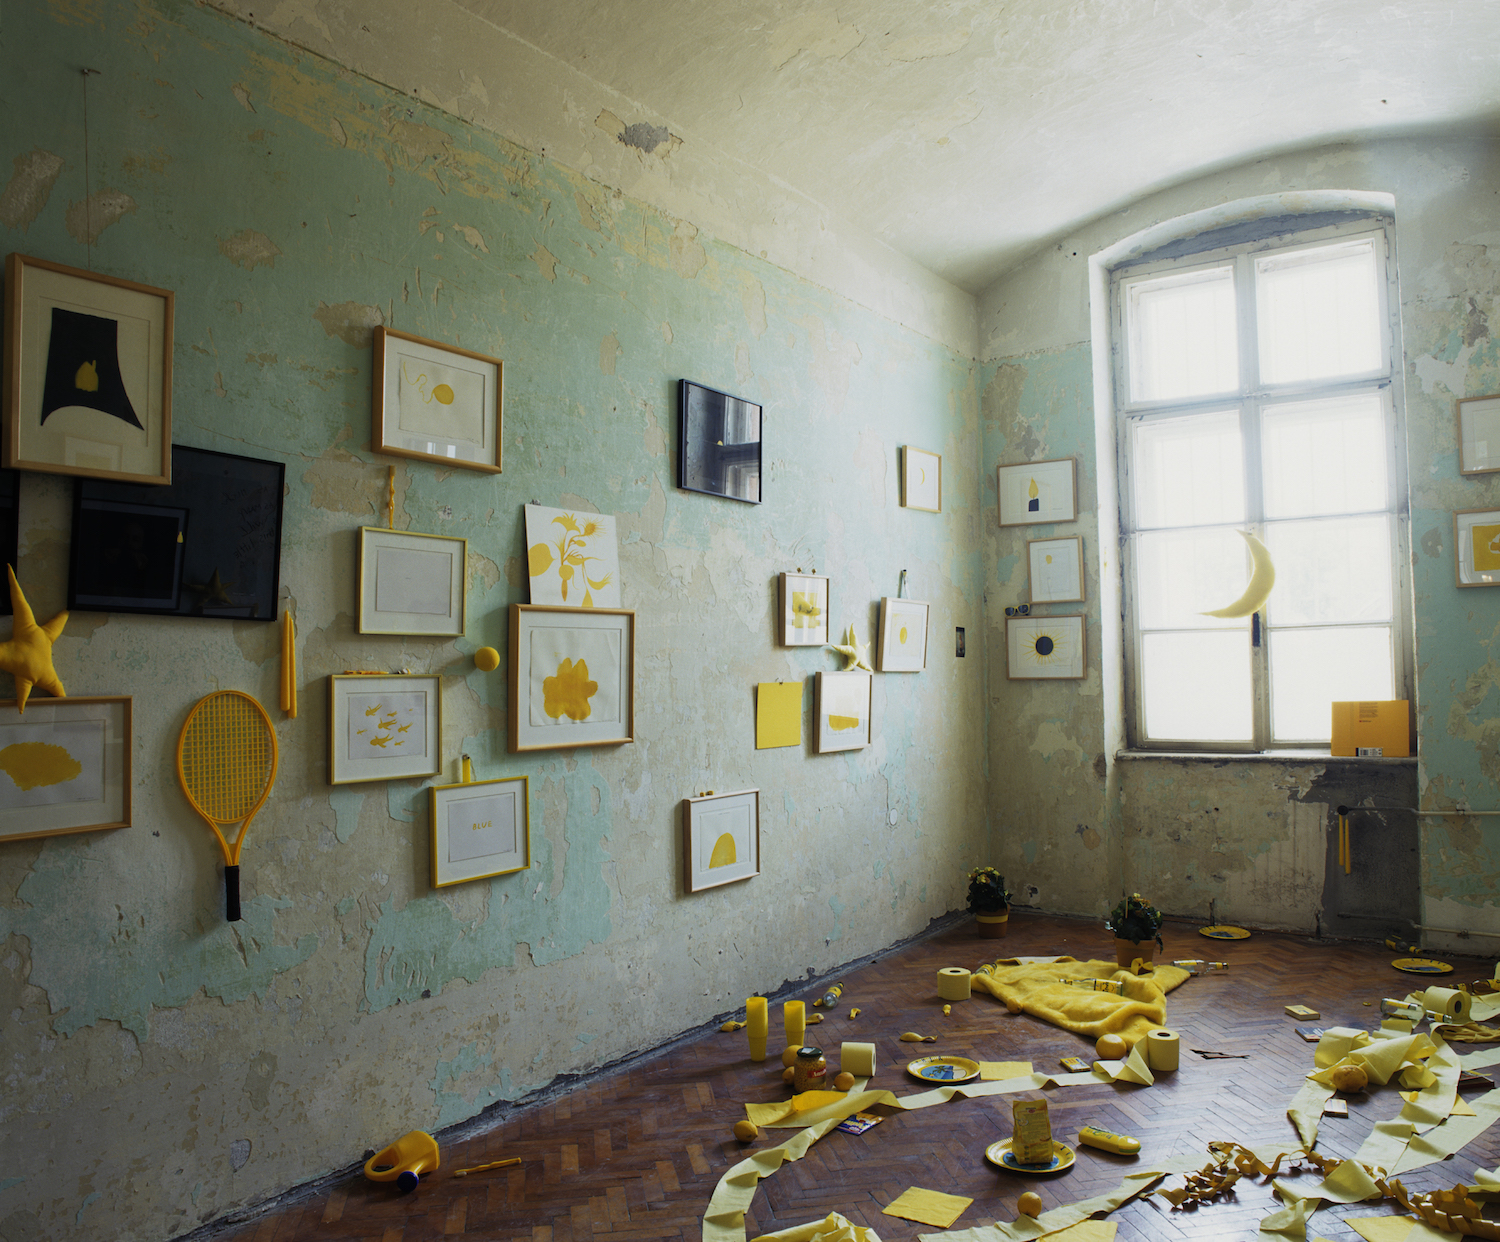 Nedko Solakov, Yellow (1997) as part of The Art of Eastern Europe in Dialogue with the West, presented in the then-unrenovated premises of the Museum of Contemporary Art Metekova, Ljubljana (2000). Image: Lado Mlekuž, Matija Pavlovec 